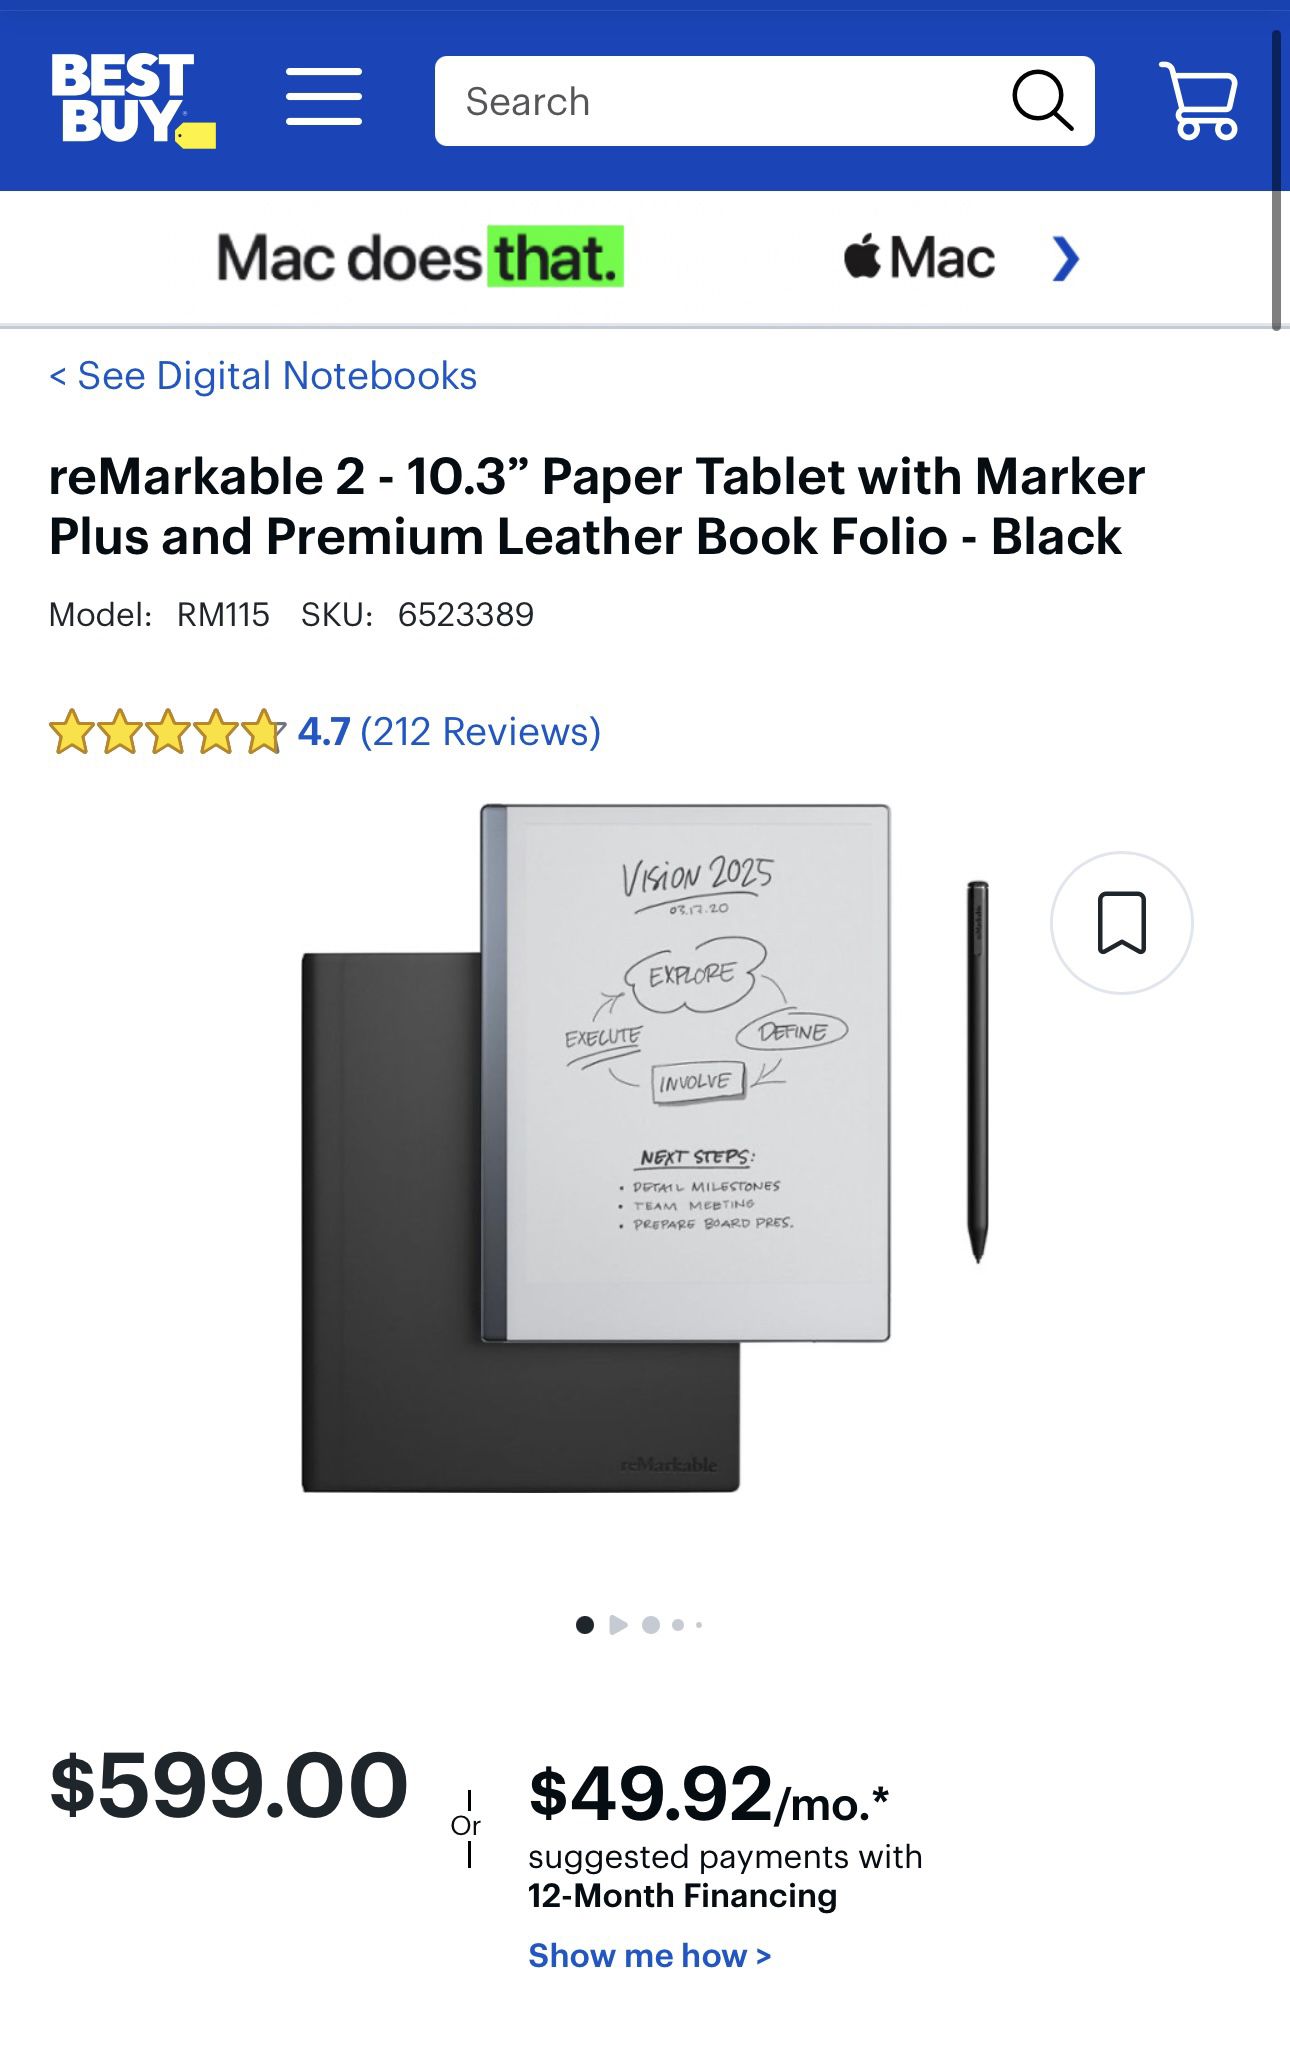 reMarkable 2 - 10.3" Paper Tablet with Marker Plus and Premium Leather Book Folio - Black